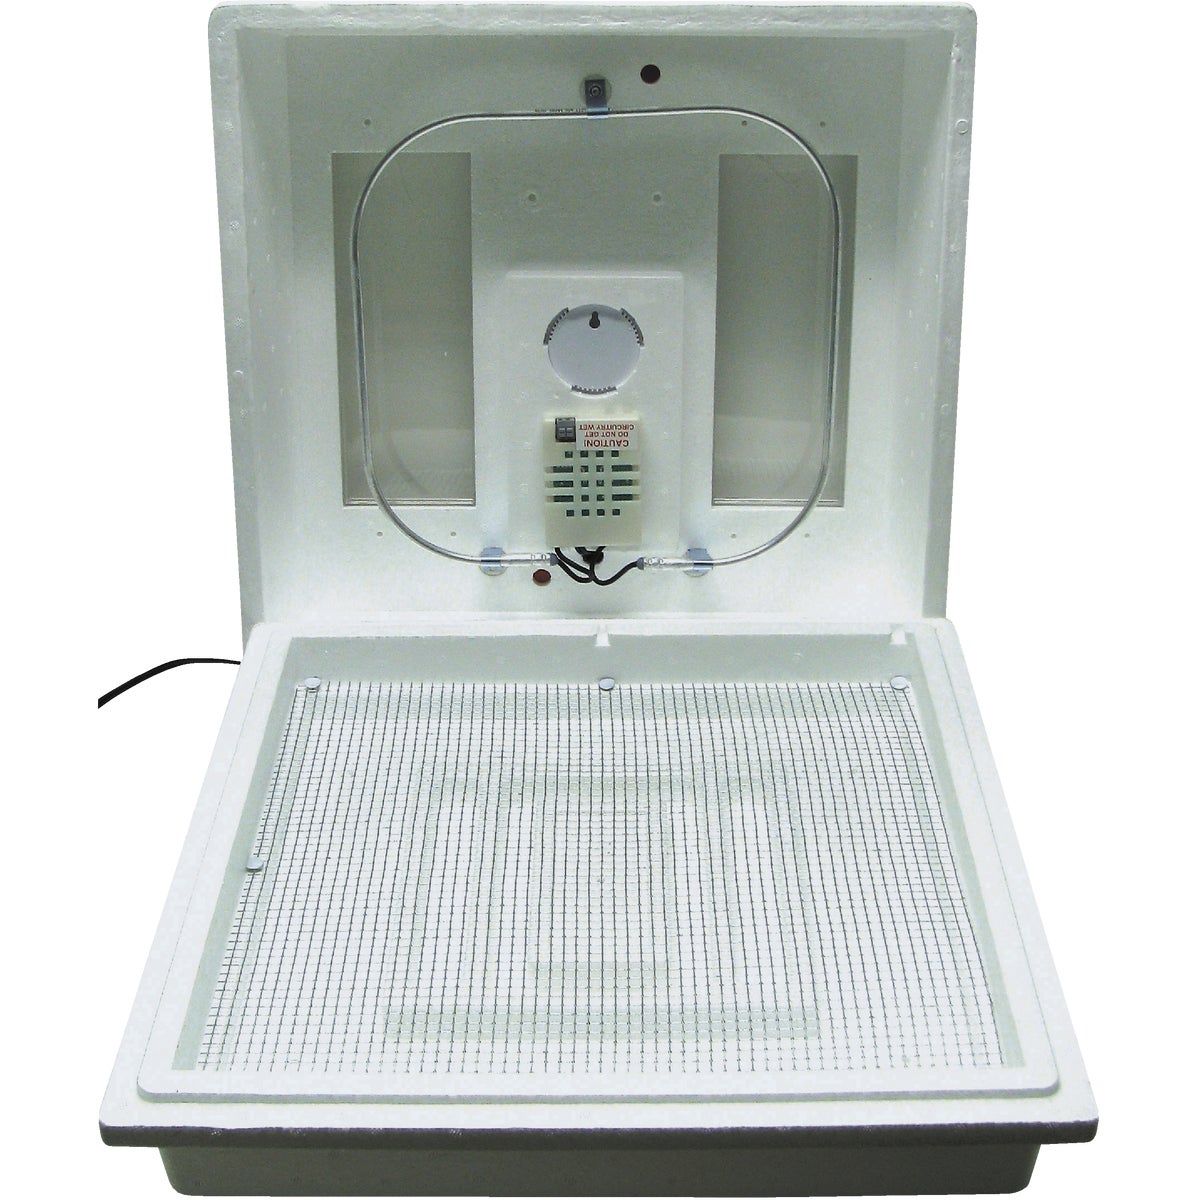 Item 702677, Incubator for hatching all types of birds.